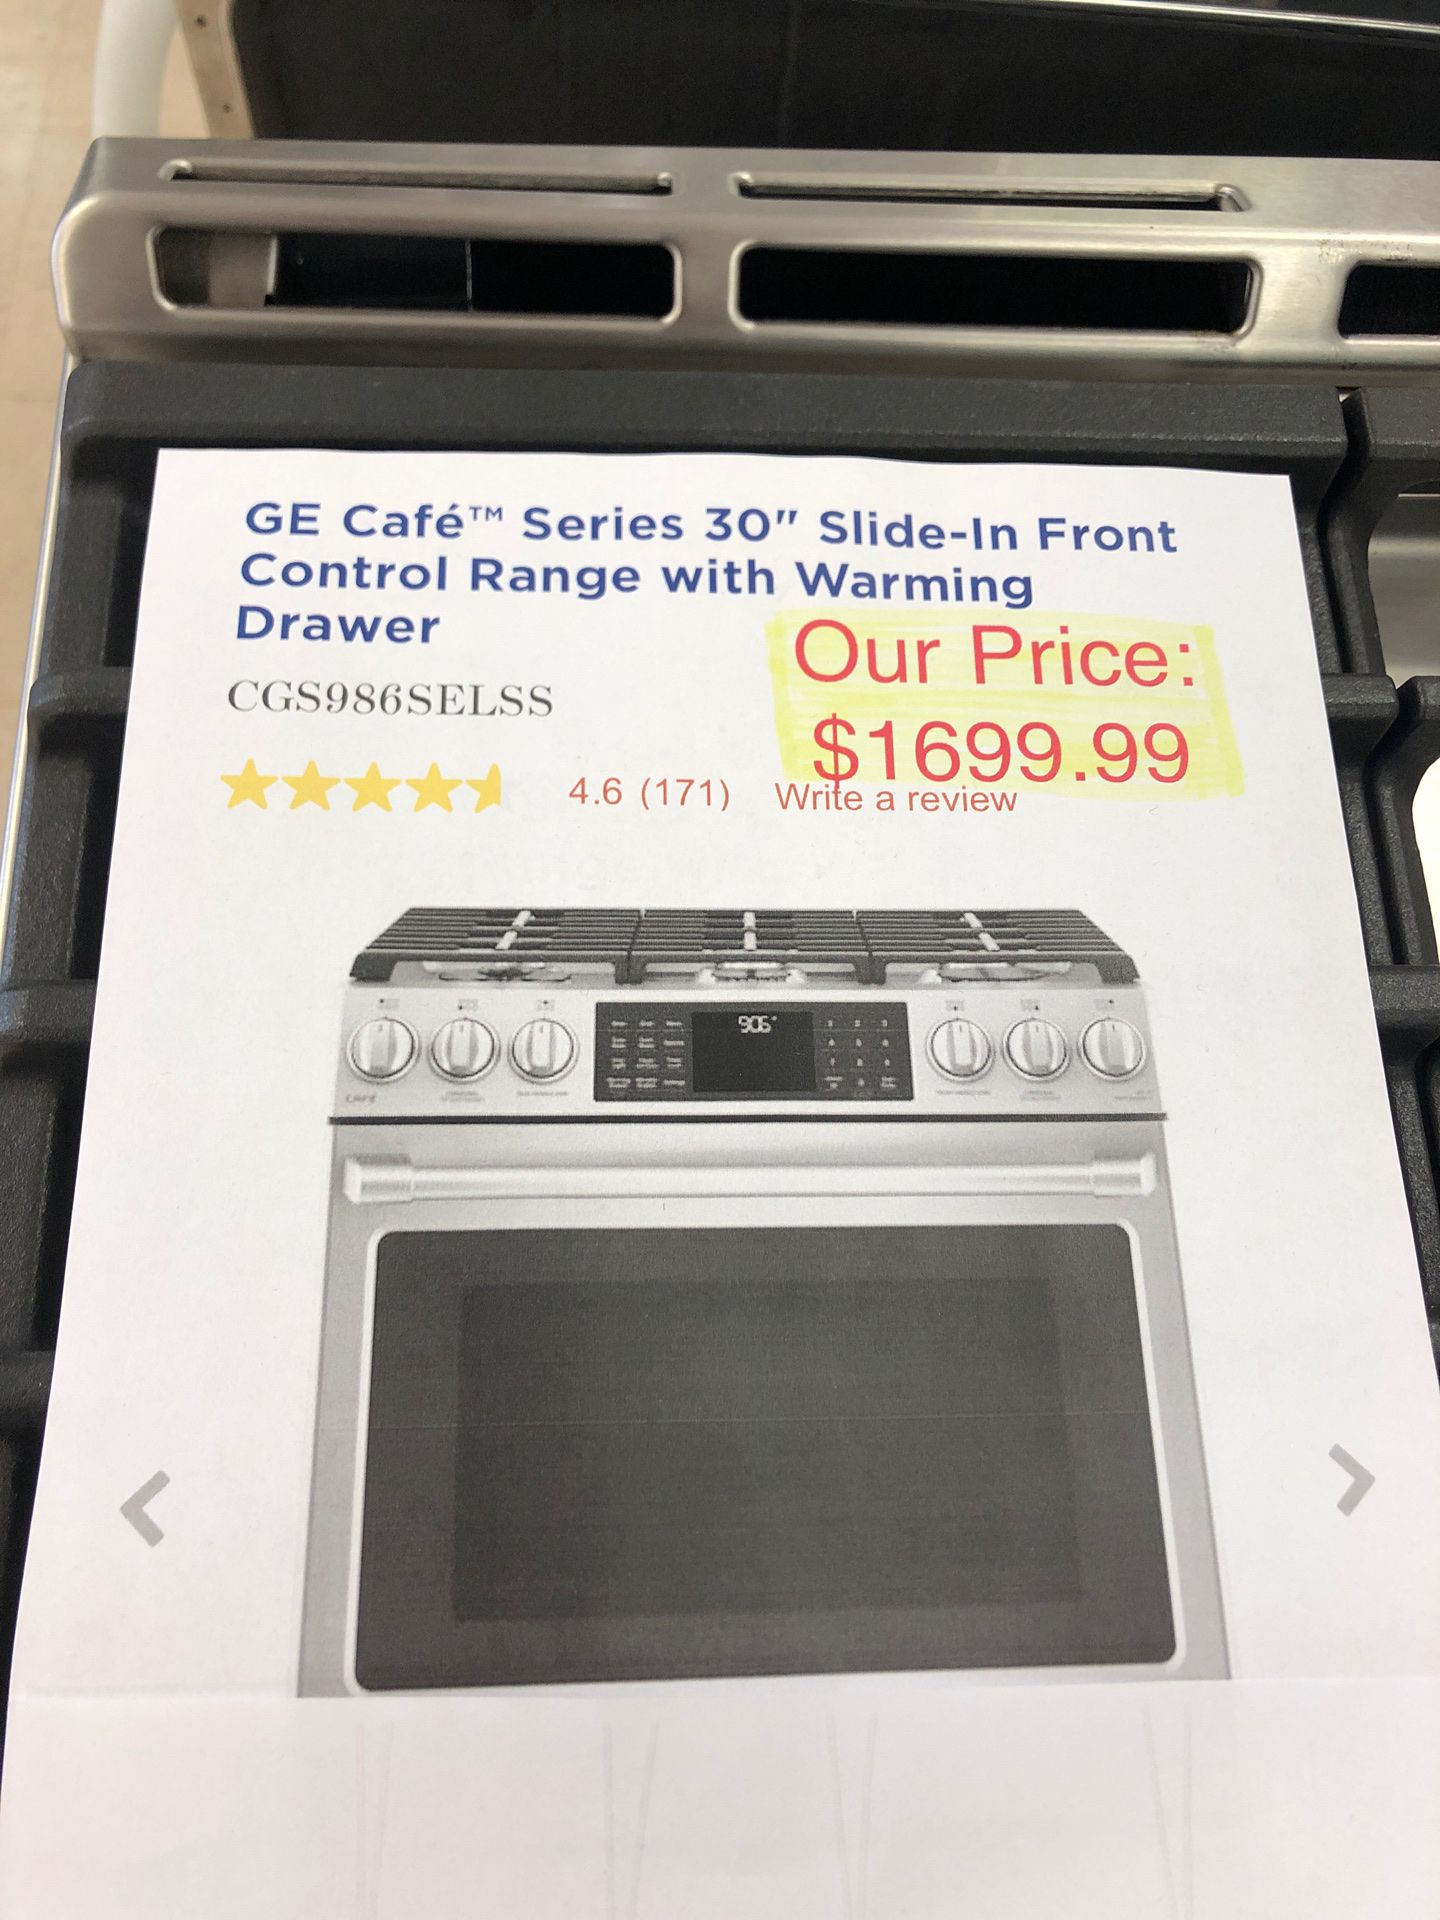 GE Cafe slide in front control range with warming drawer